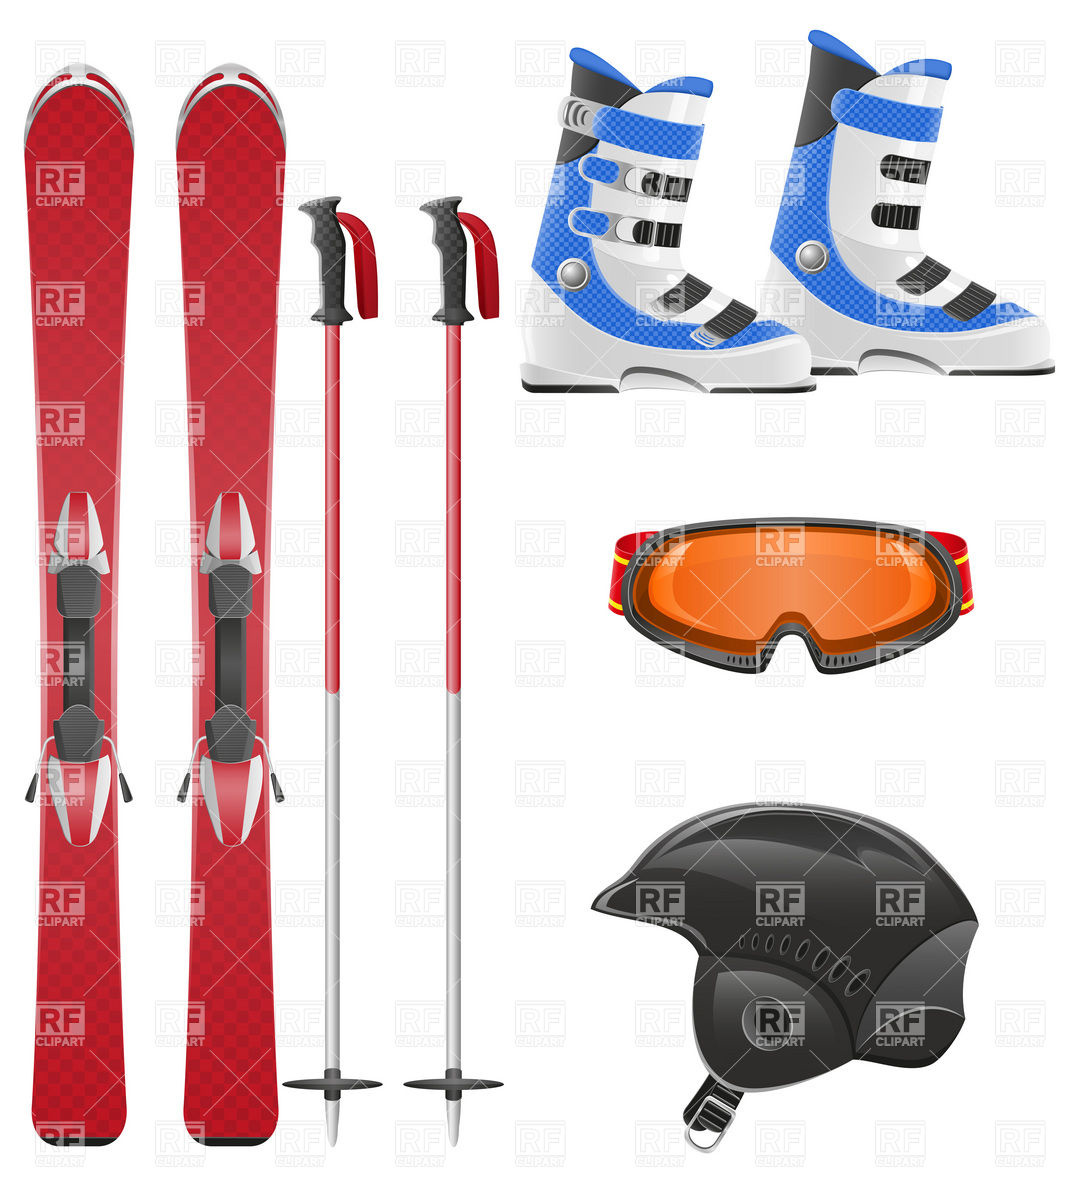 Ski Equipment Icon Set 19816 Sport And Leisure Download Royalty